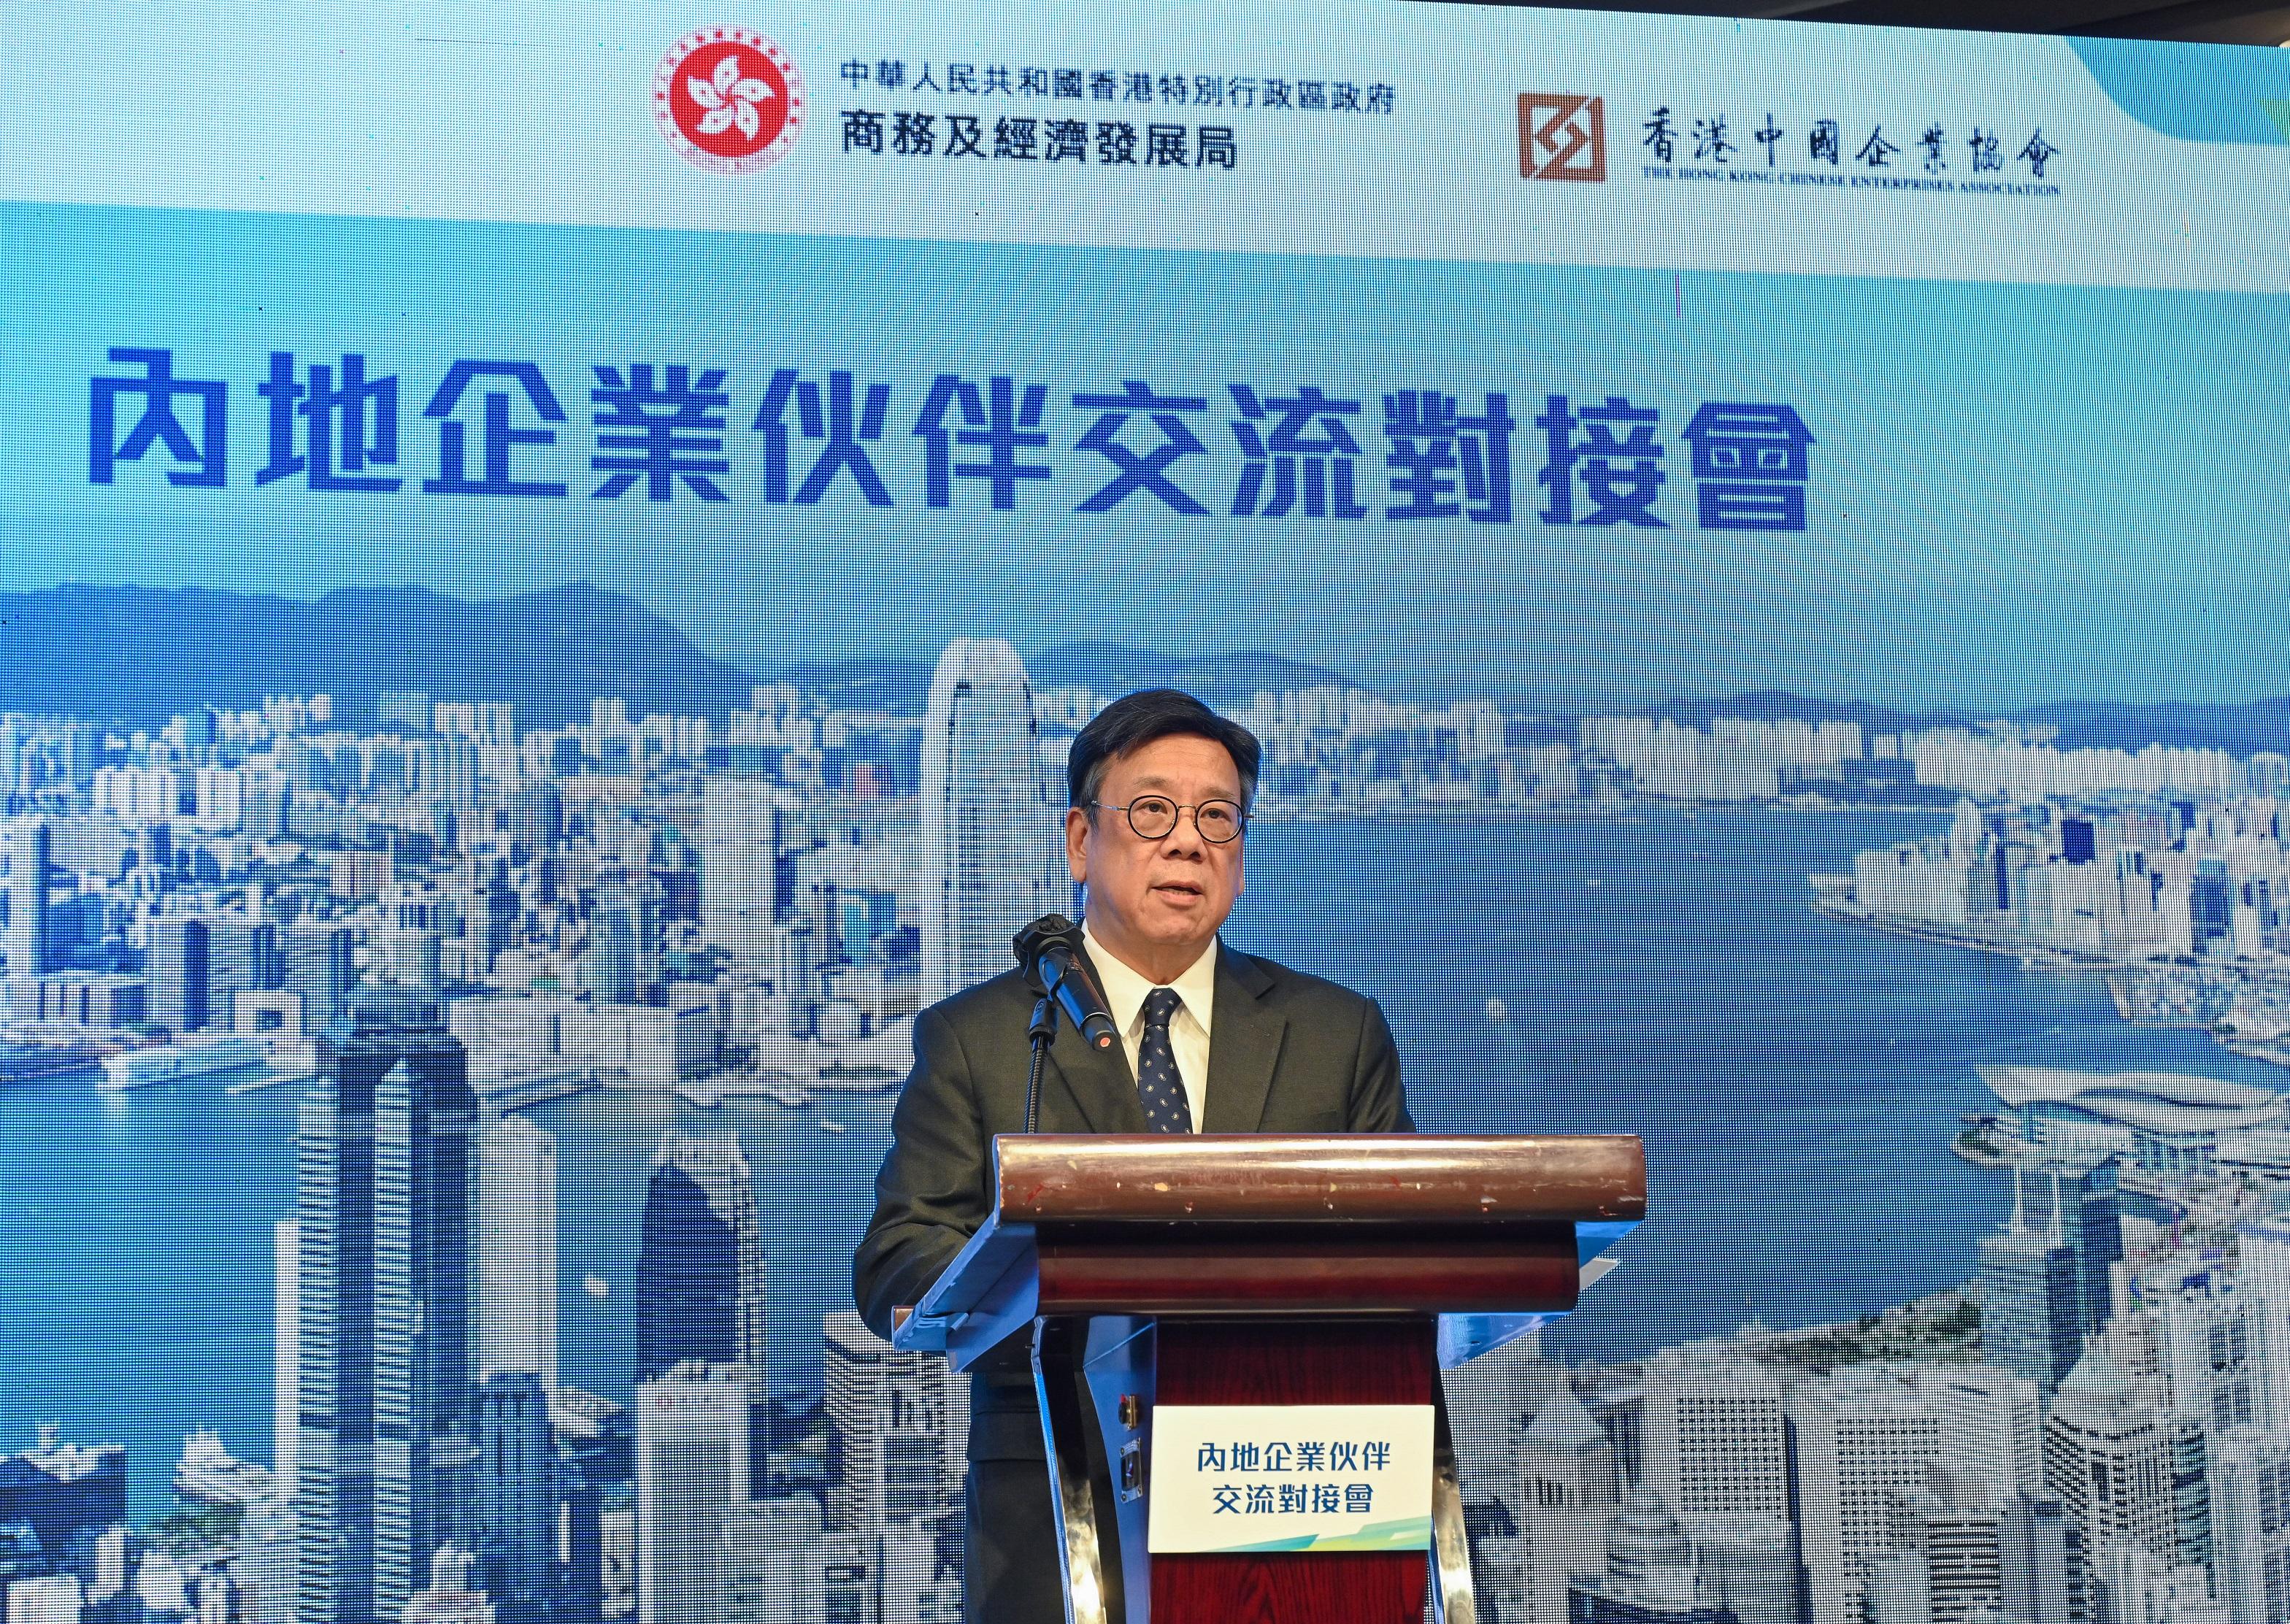 The Commerce and Economic Development Bureau in conjunction with the Hong Kong Chinese Enterprises Association organised the Mainland Enterprises Partnership Exchange and Interface Session today (July 31). Photo shows the Secretary for Commerce and Economic Development, Mr Algernon Yau, delivering a speech at the opening session.